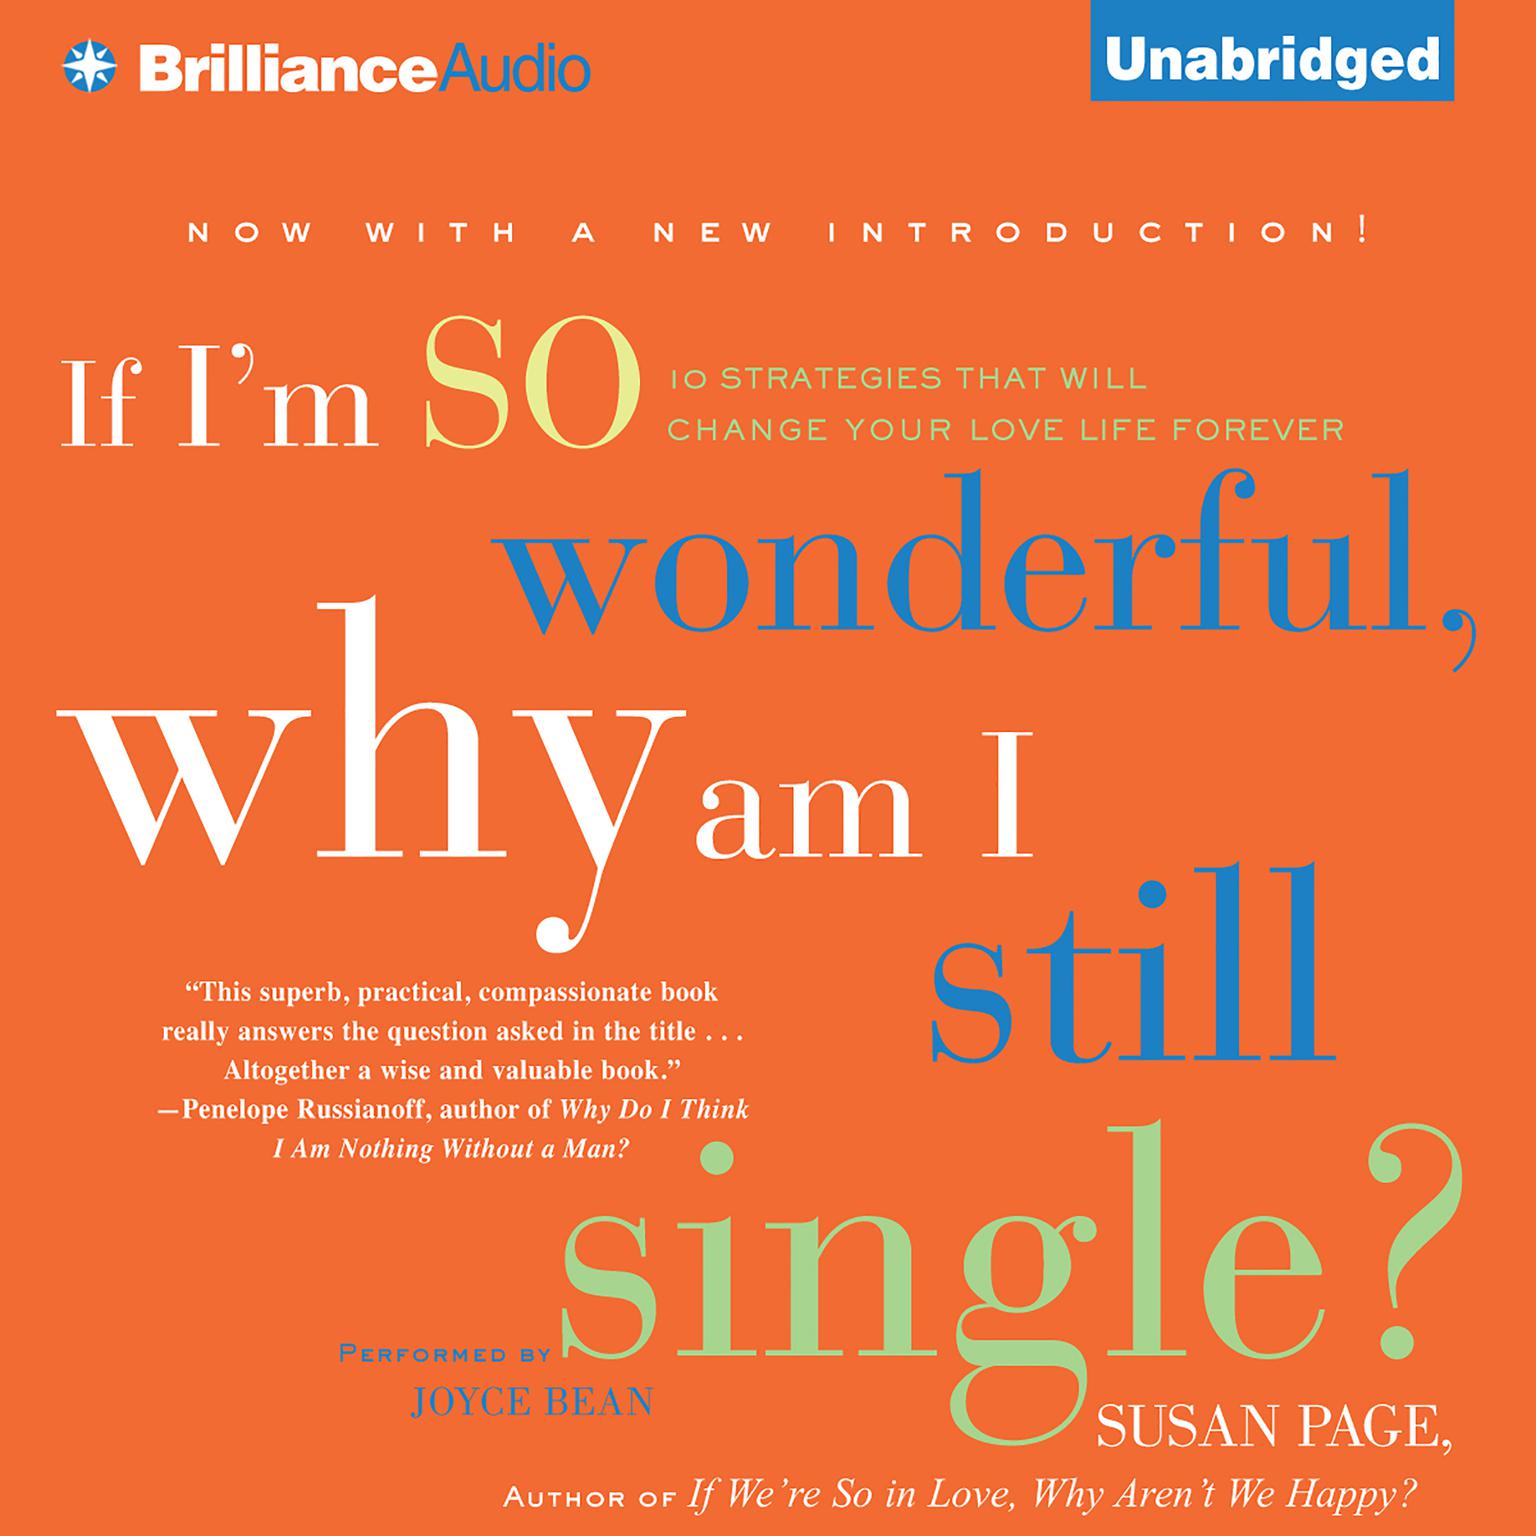 If Im So Wonderful, Why Am I Still Single?: Ten Strategies That Will Change Your Love Life Forever Audiobook, by Susan Page